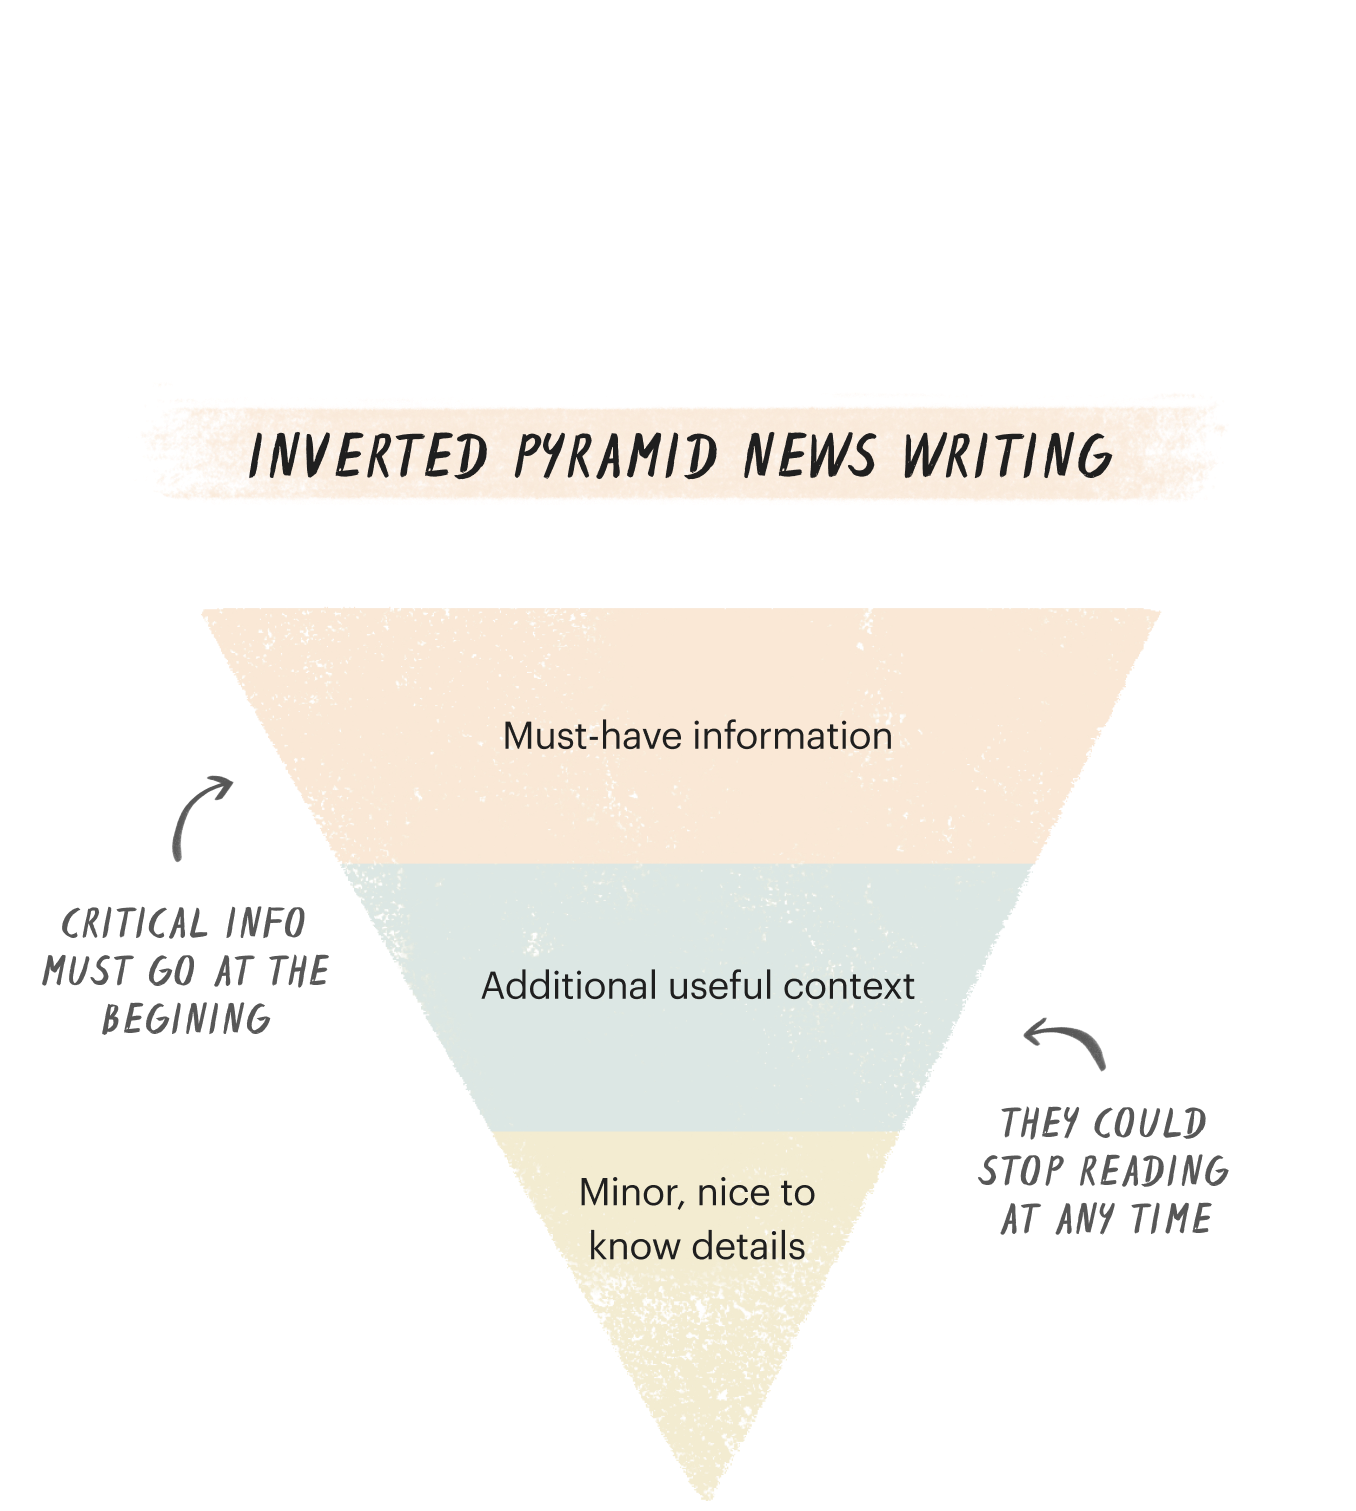 Inverted pyramid news writing. The top of the pyramid has must-have information, the middle has additional useful context, and the tip has minor, nice to know details. Critical information must go at the beginning because they could stop reading at any time.